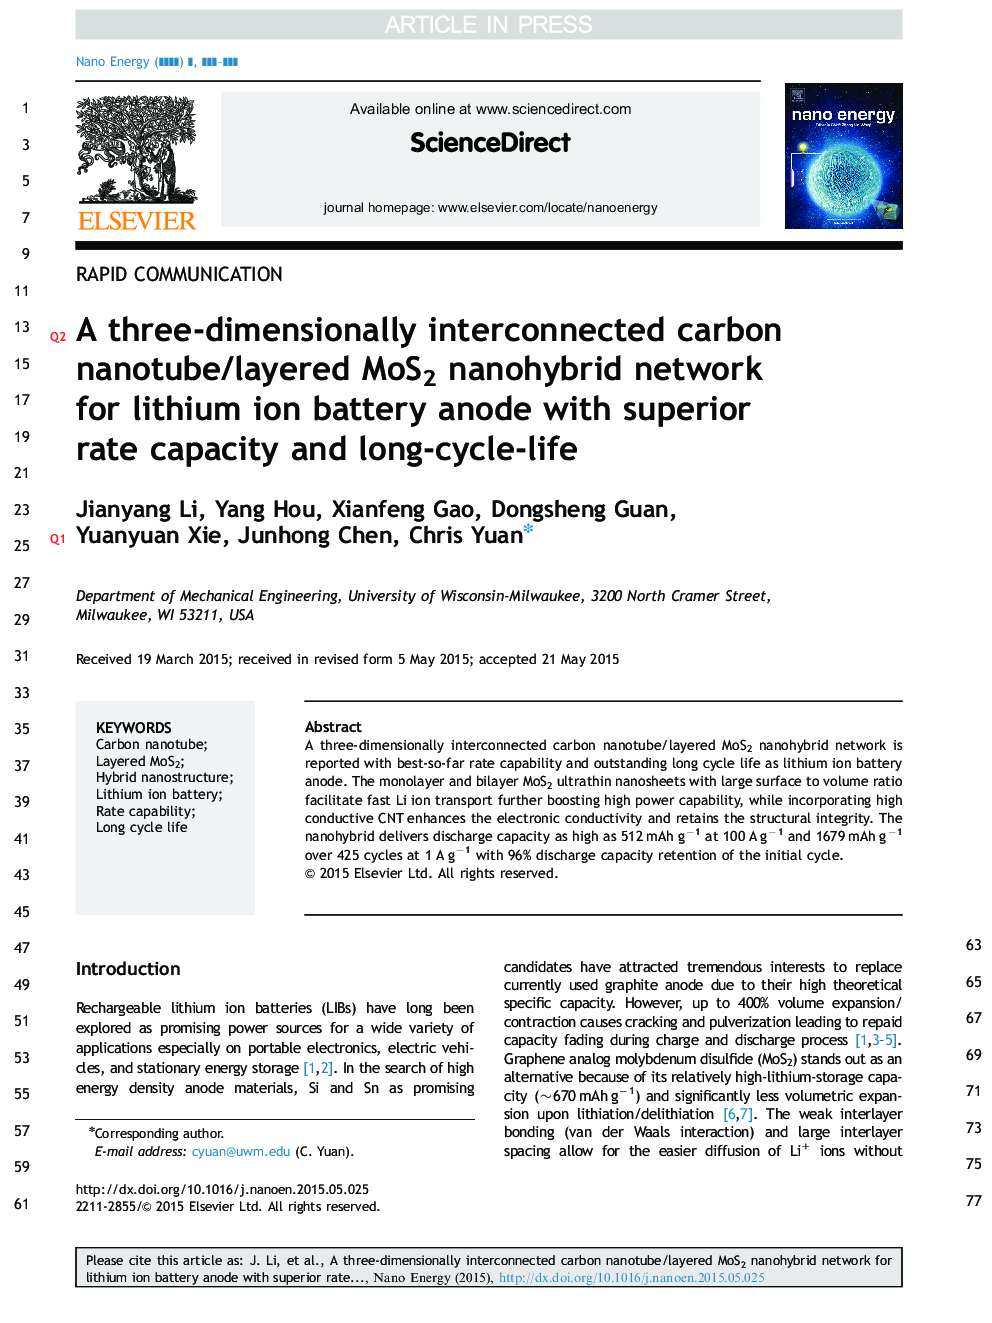 A three-dimensionally interconnected carbon nanotube/layered MoS2 nanohybrid network for lithium ion battery anode with superior rate capacity and long-cycle-life